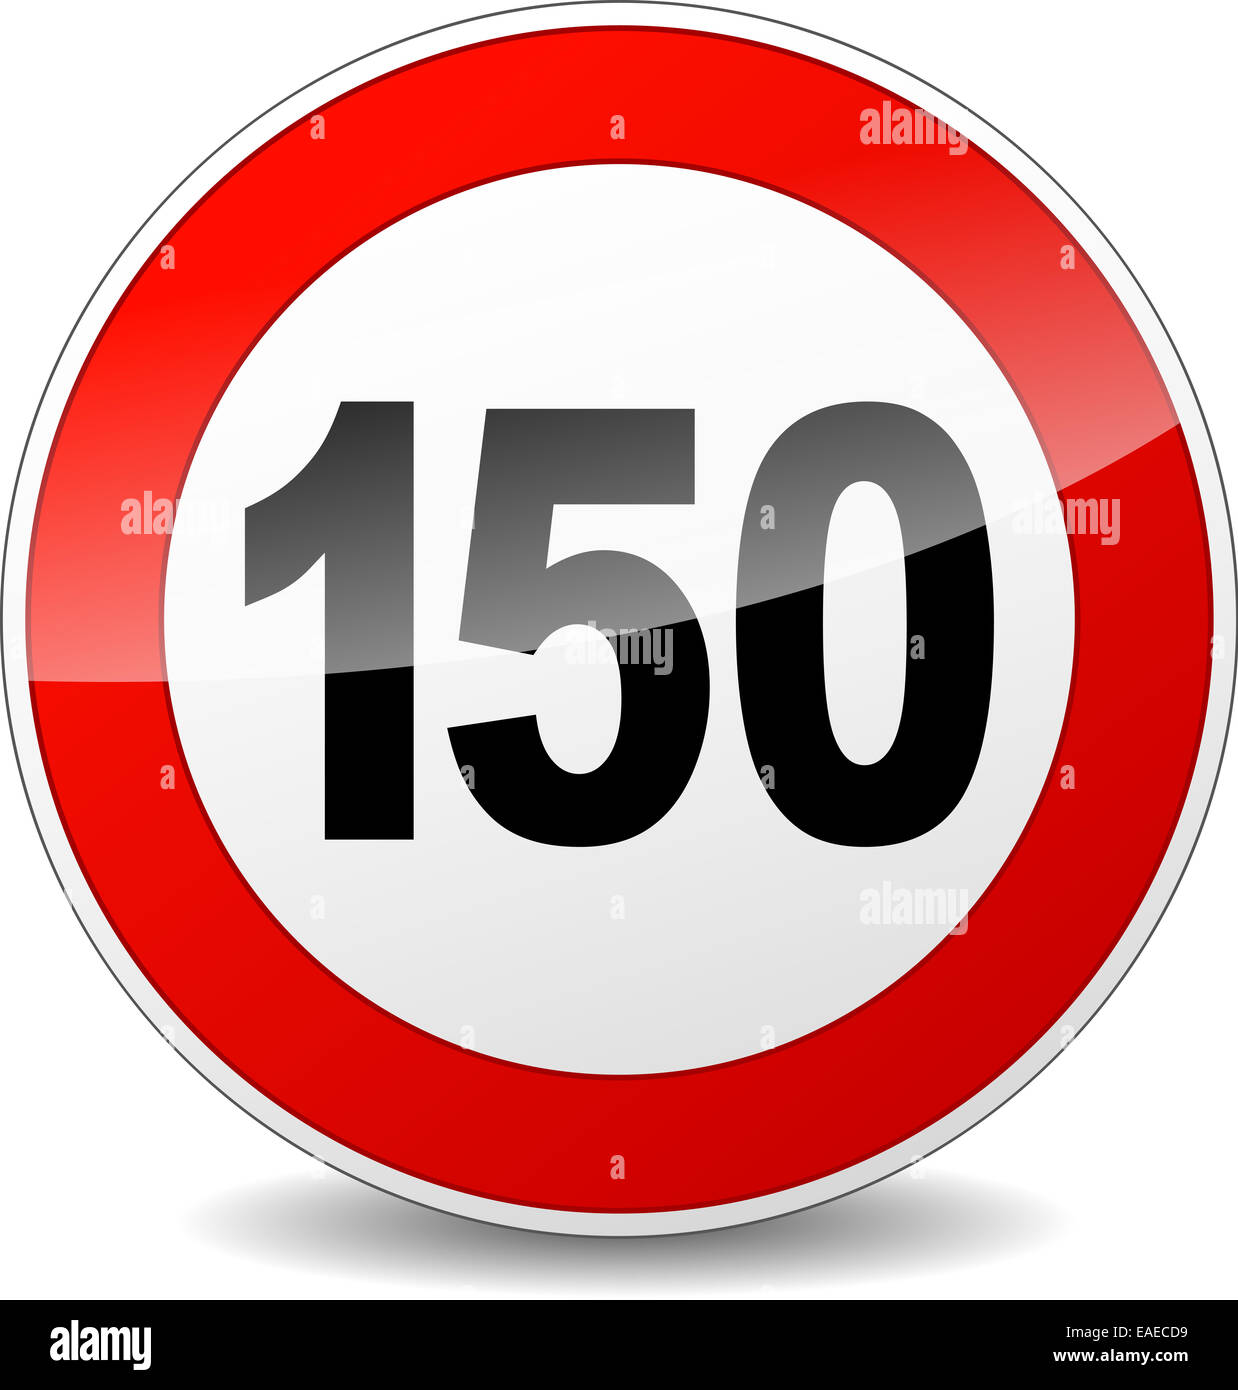 illustration of red and black speed limit sign Stock Photo